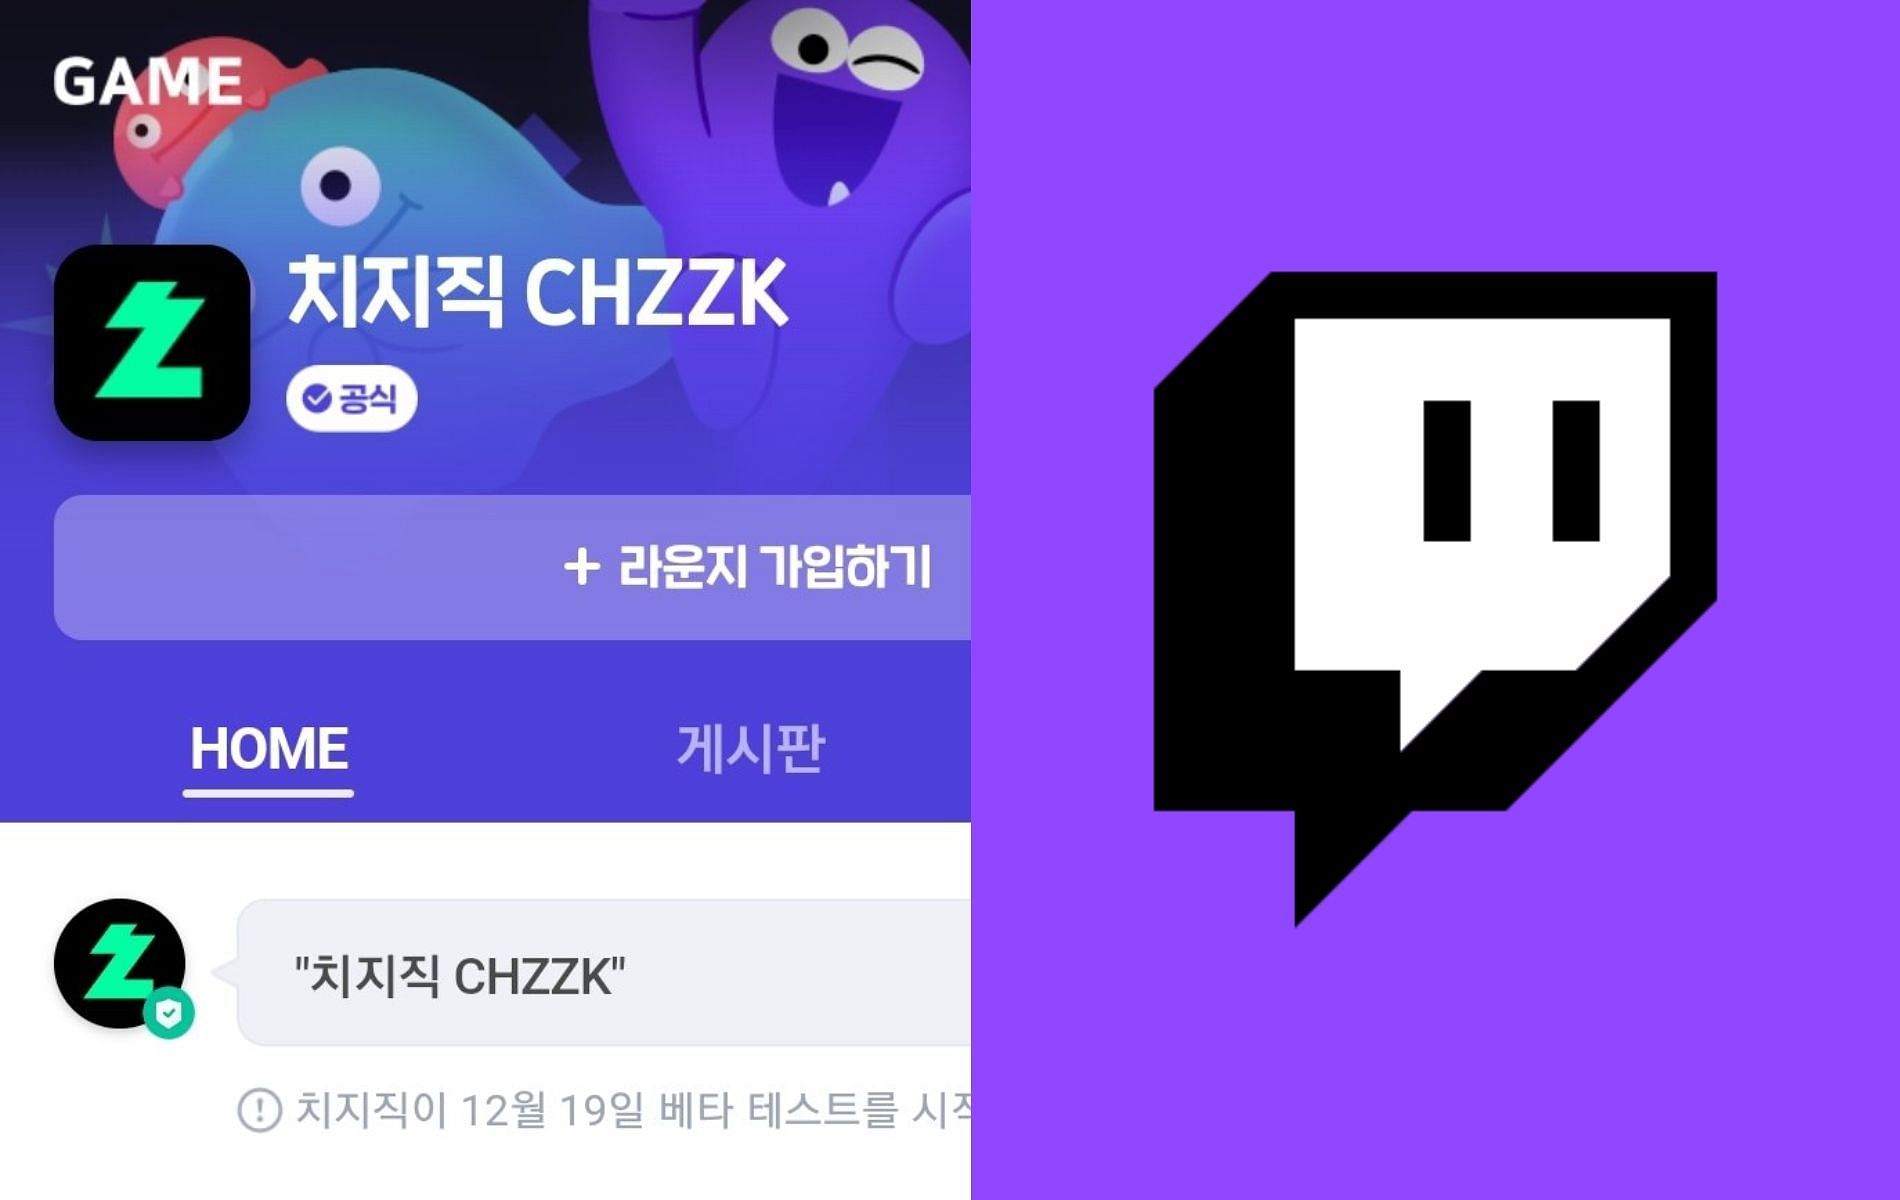 CHZZK set to be launched following Twitch